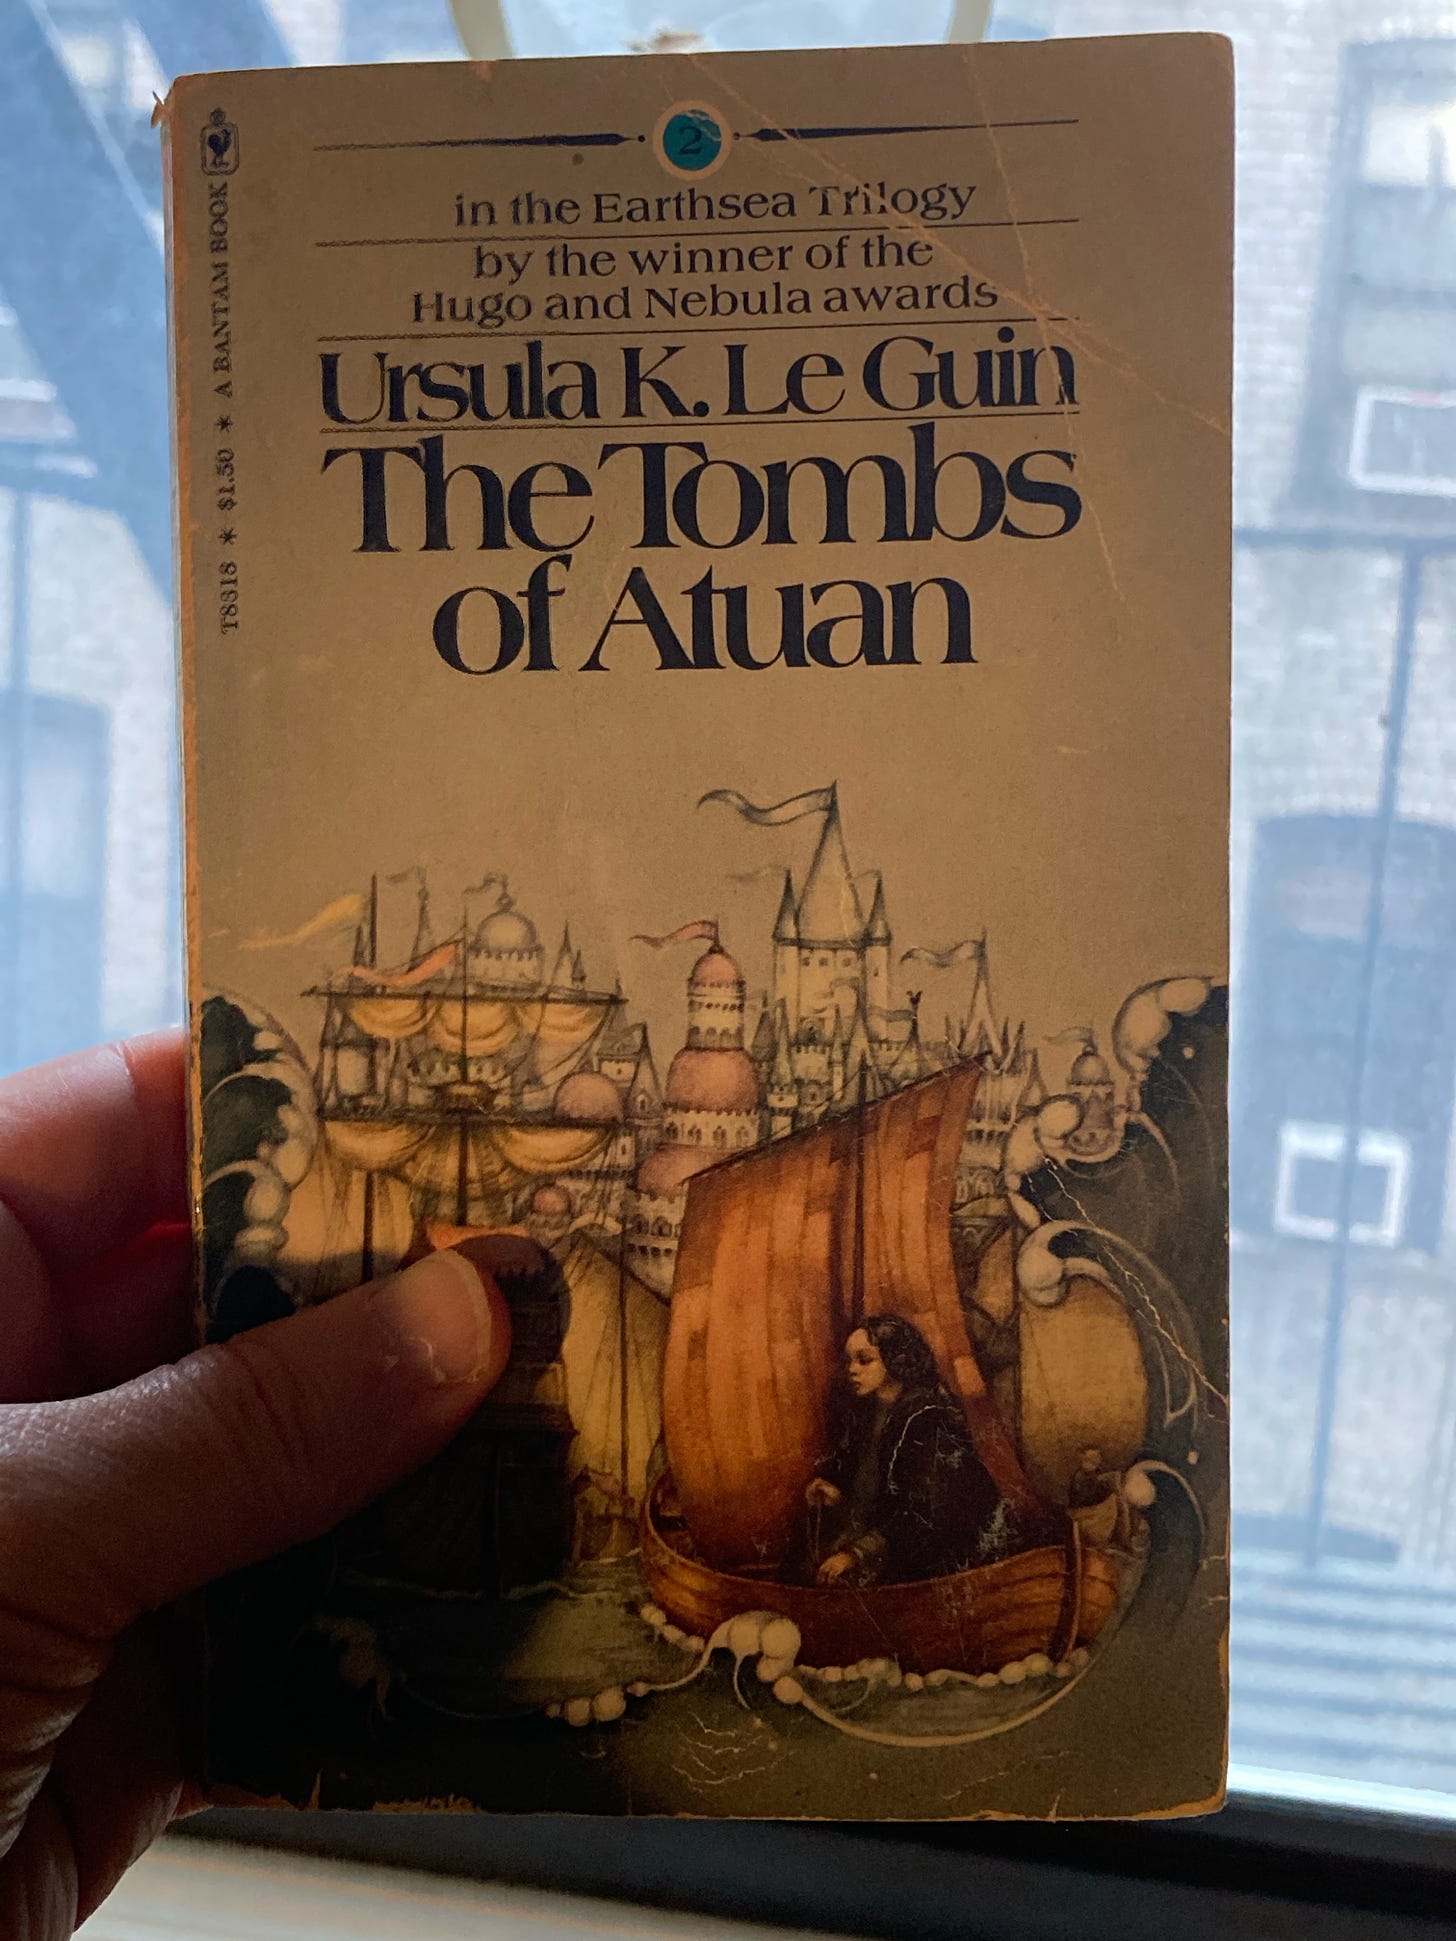 a battered paperback copy of The Tombs of Atuan